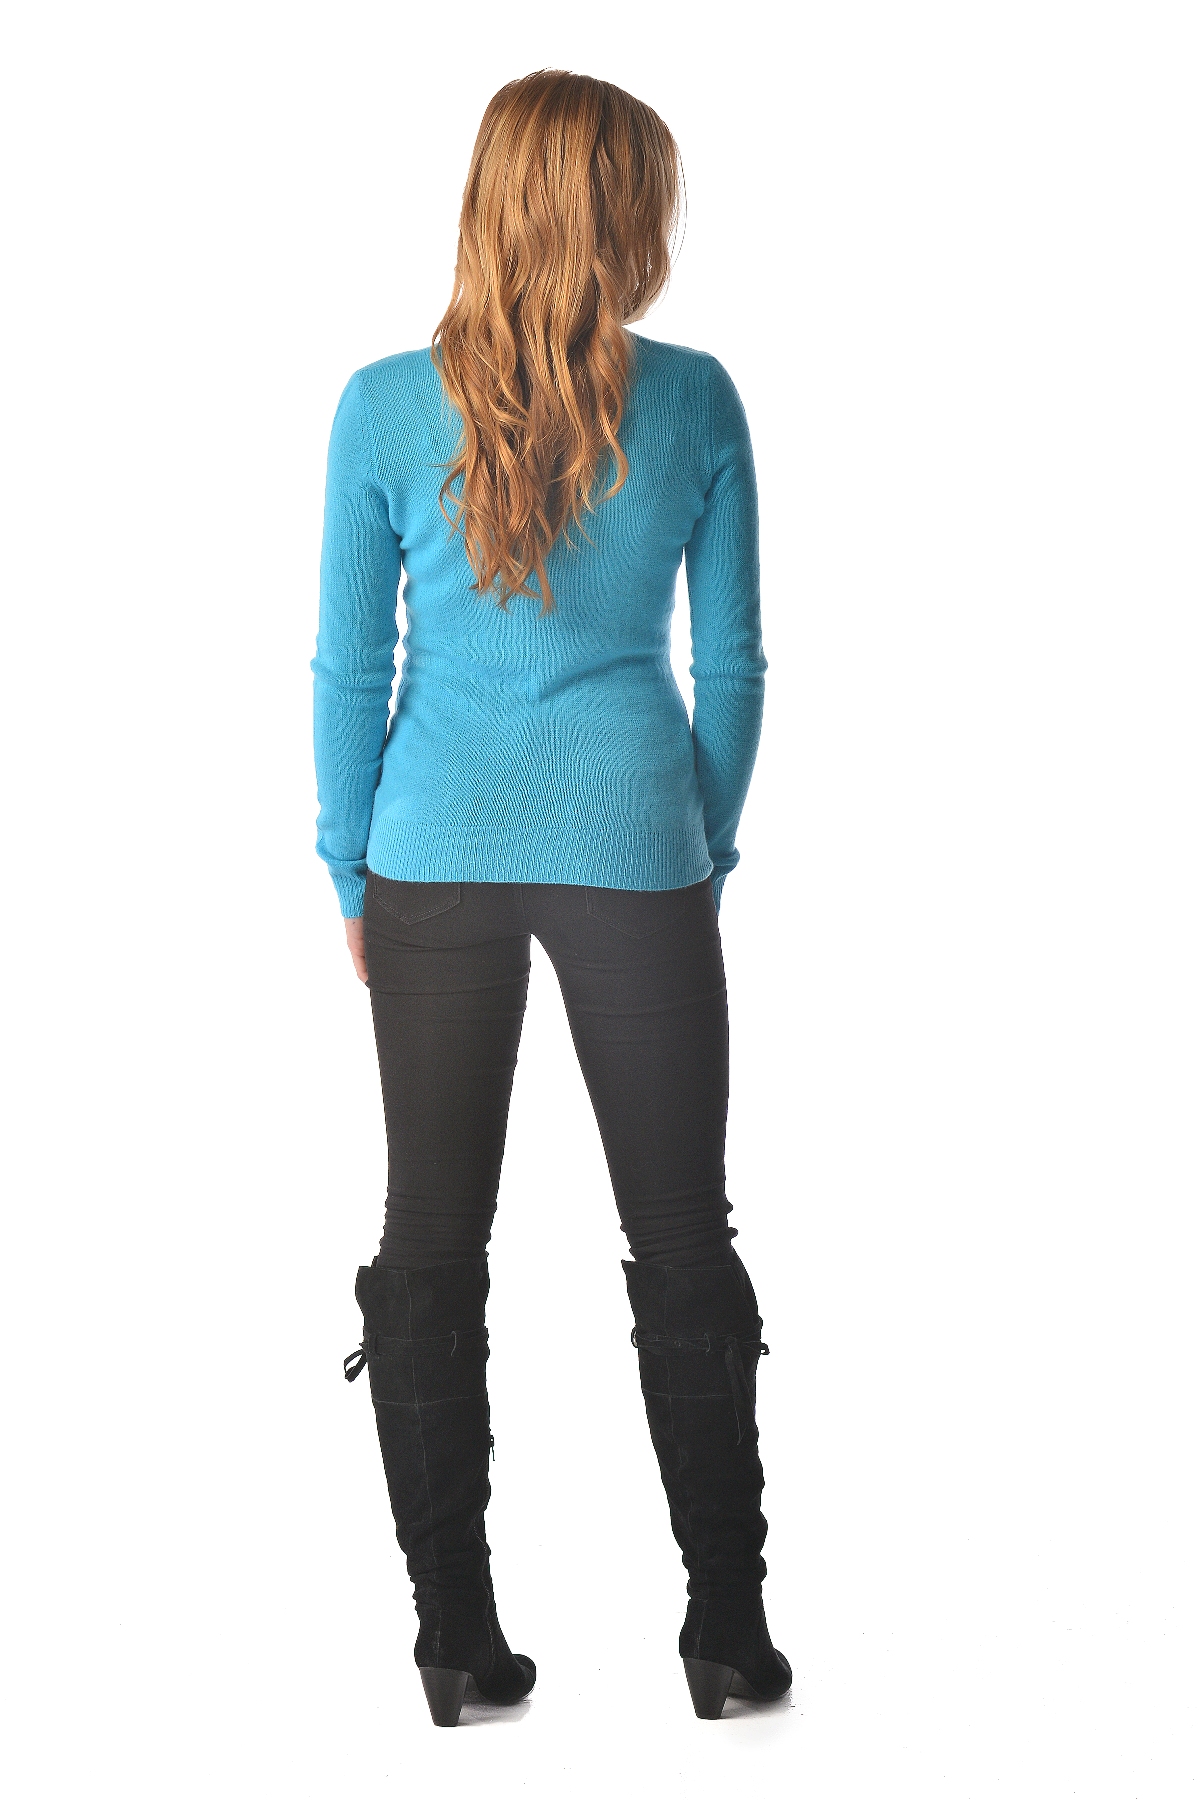 Pure Cashmere V-Neck Spring Sweater for Women (Turquoise Blue, Large)